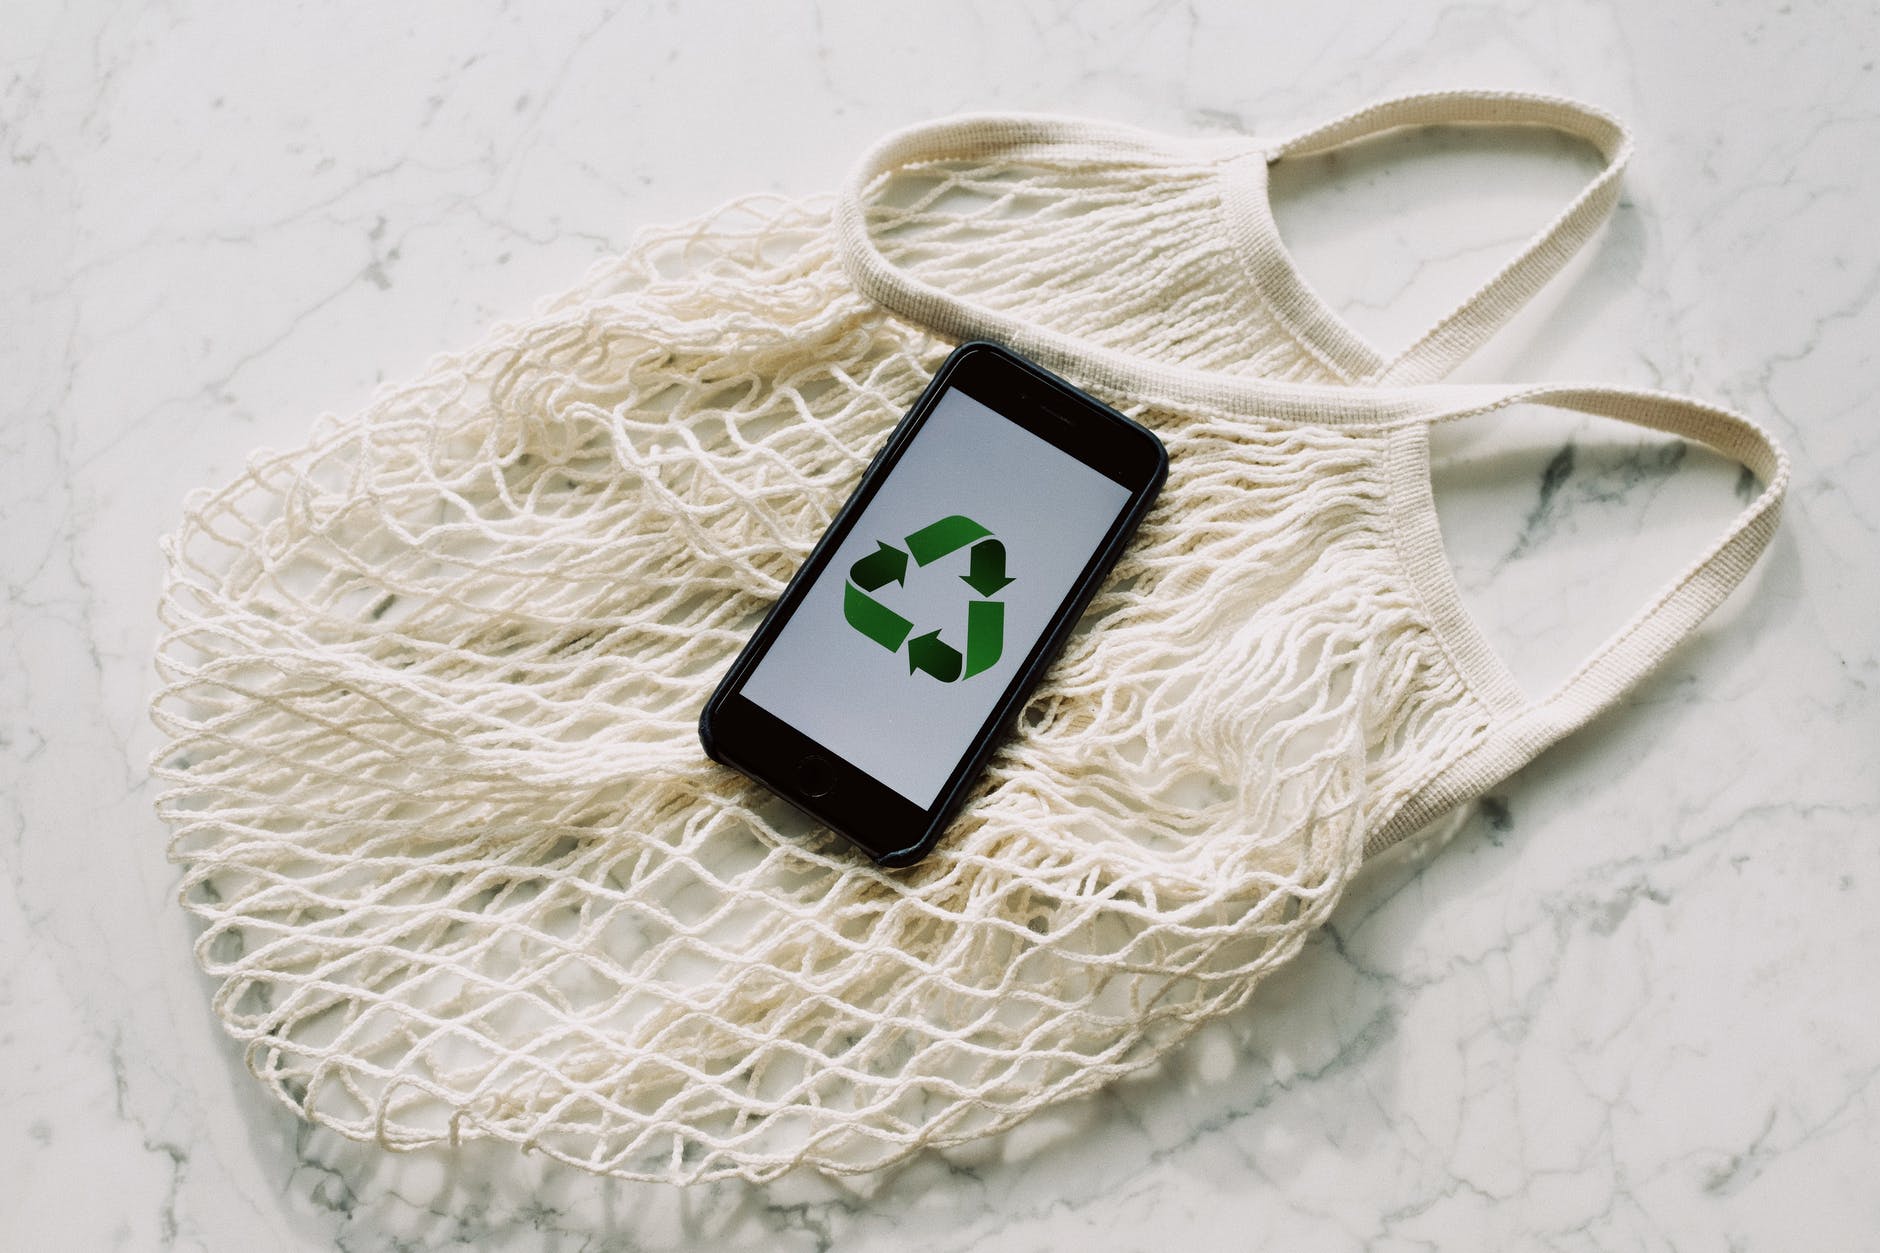 mesh bag with a recycling logo on a phone suggesting environmental sustainability